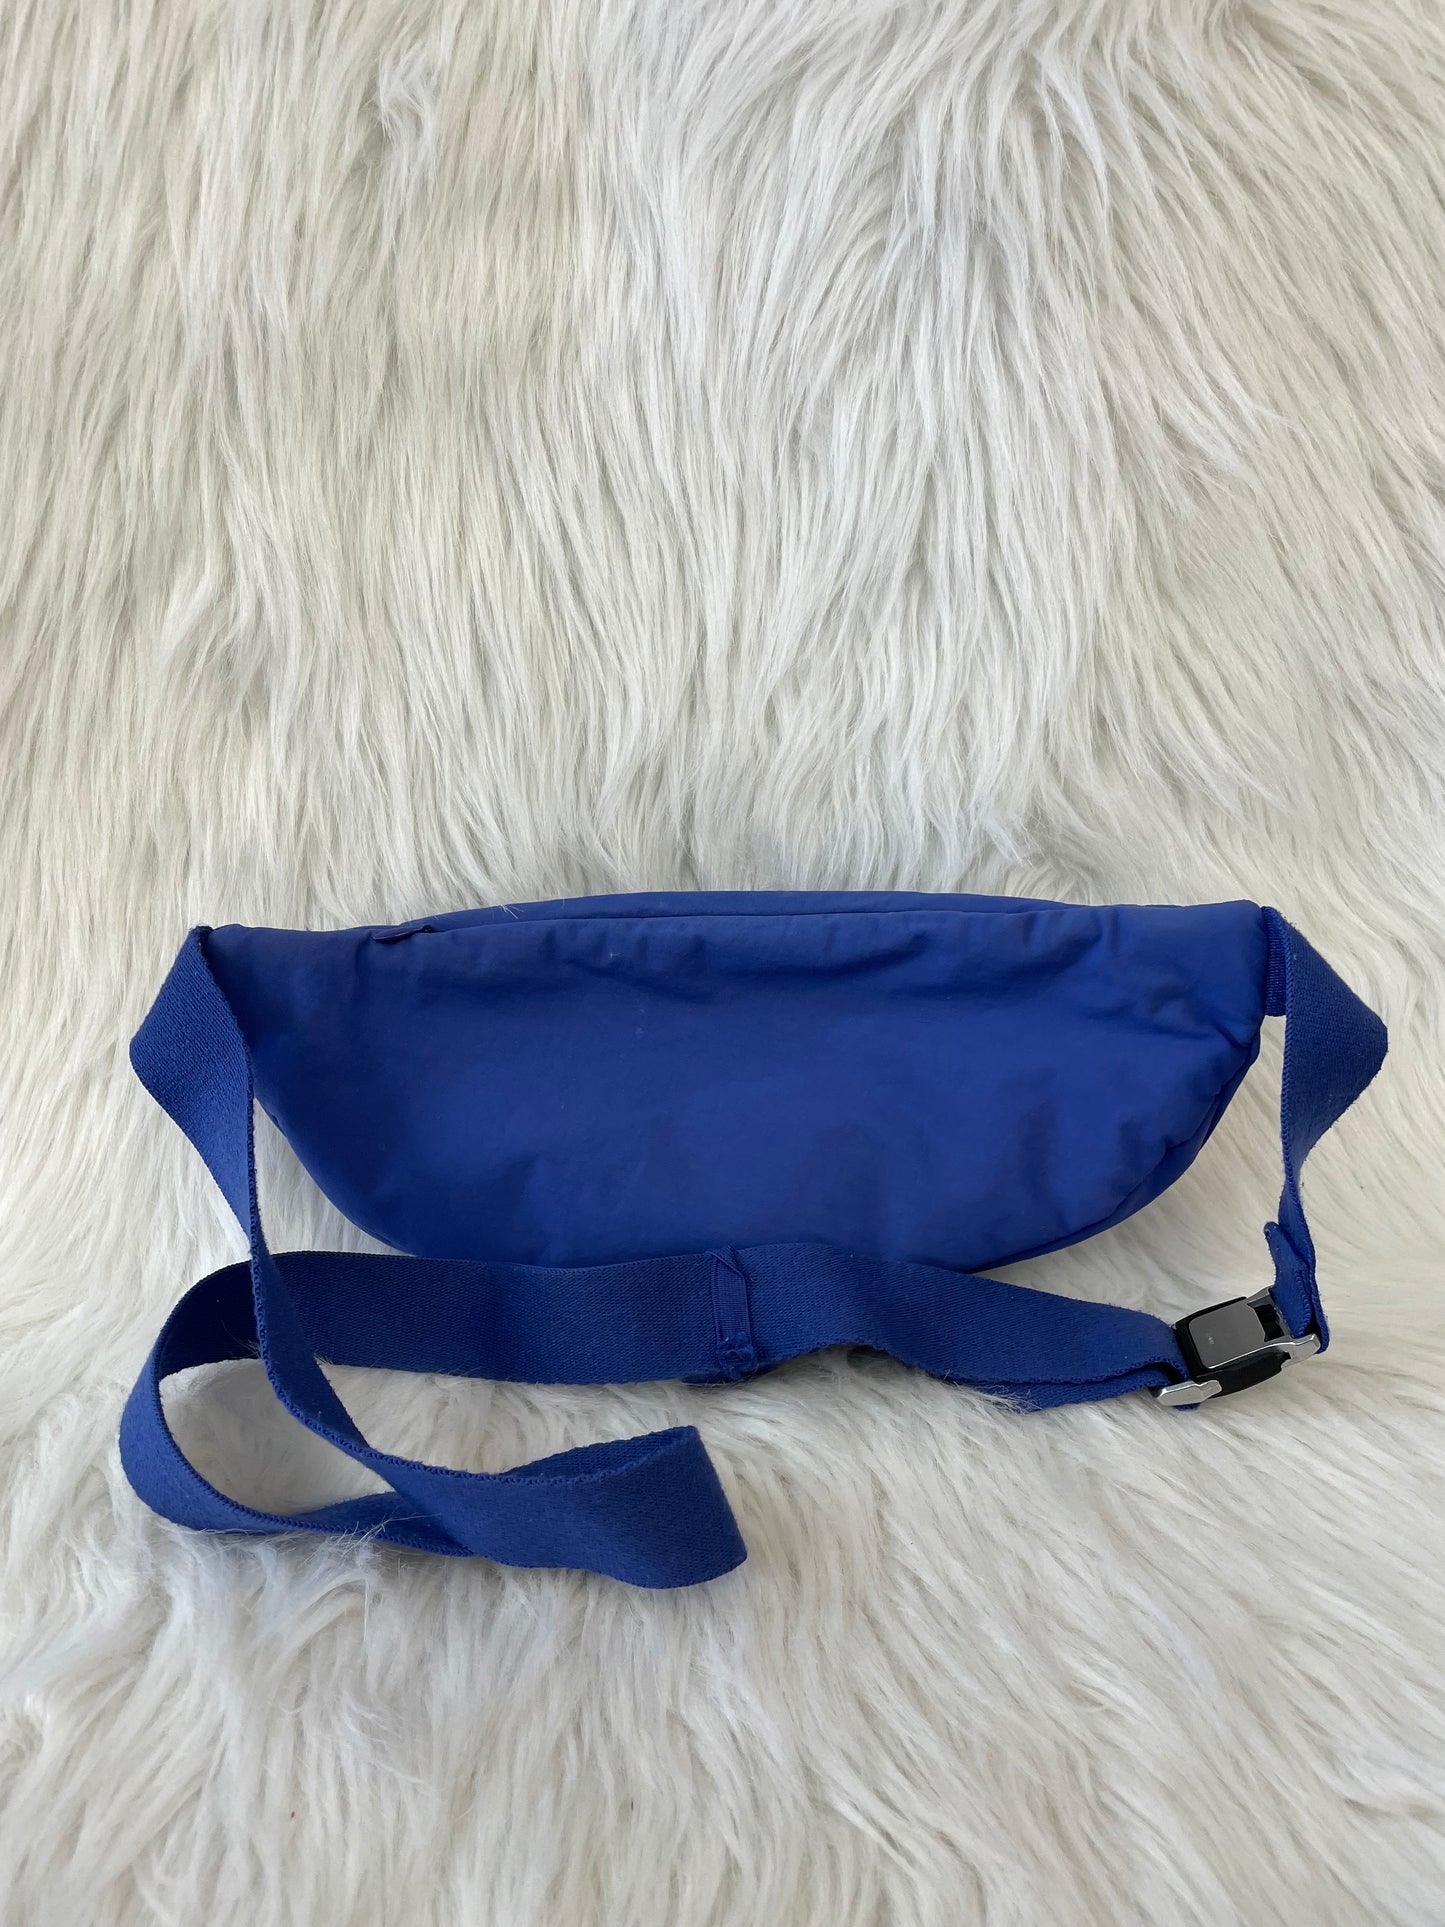 Belt Bag By Athleta  Size: Small